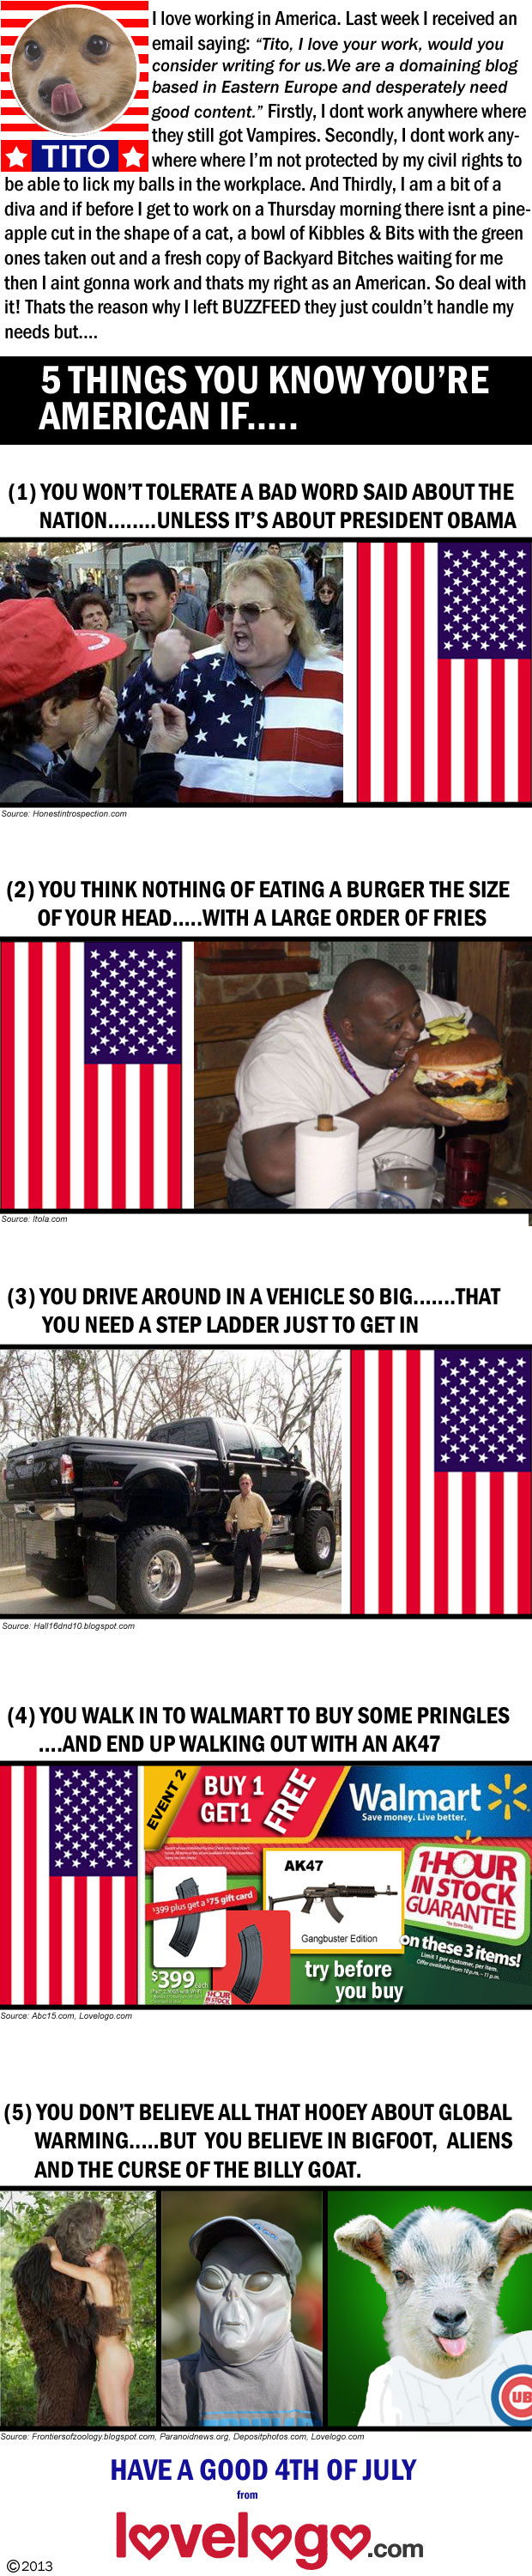 5 Things You know You're American If ....